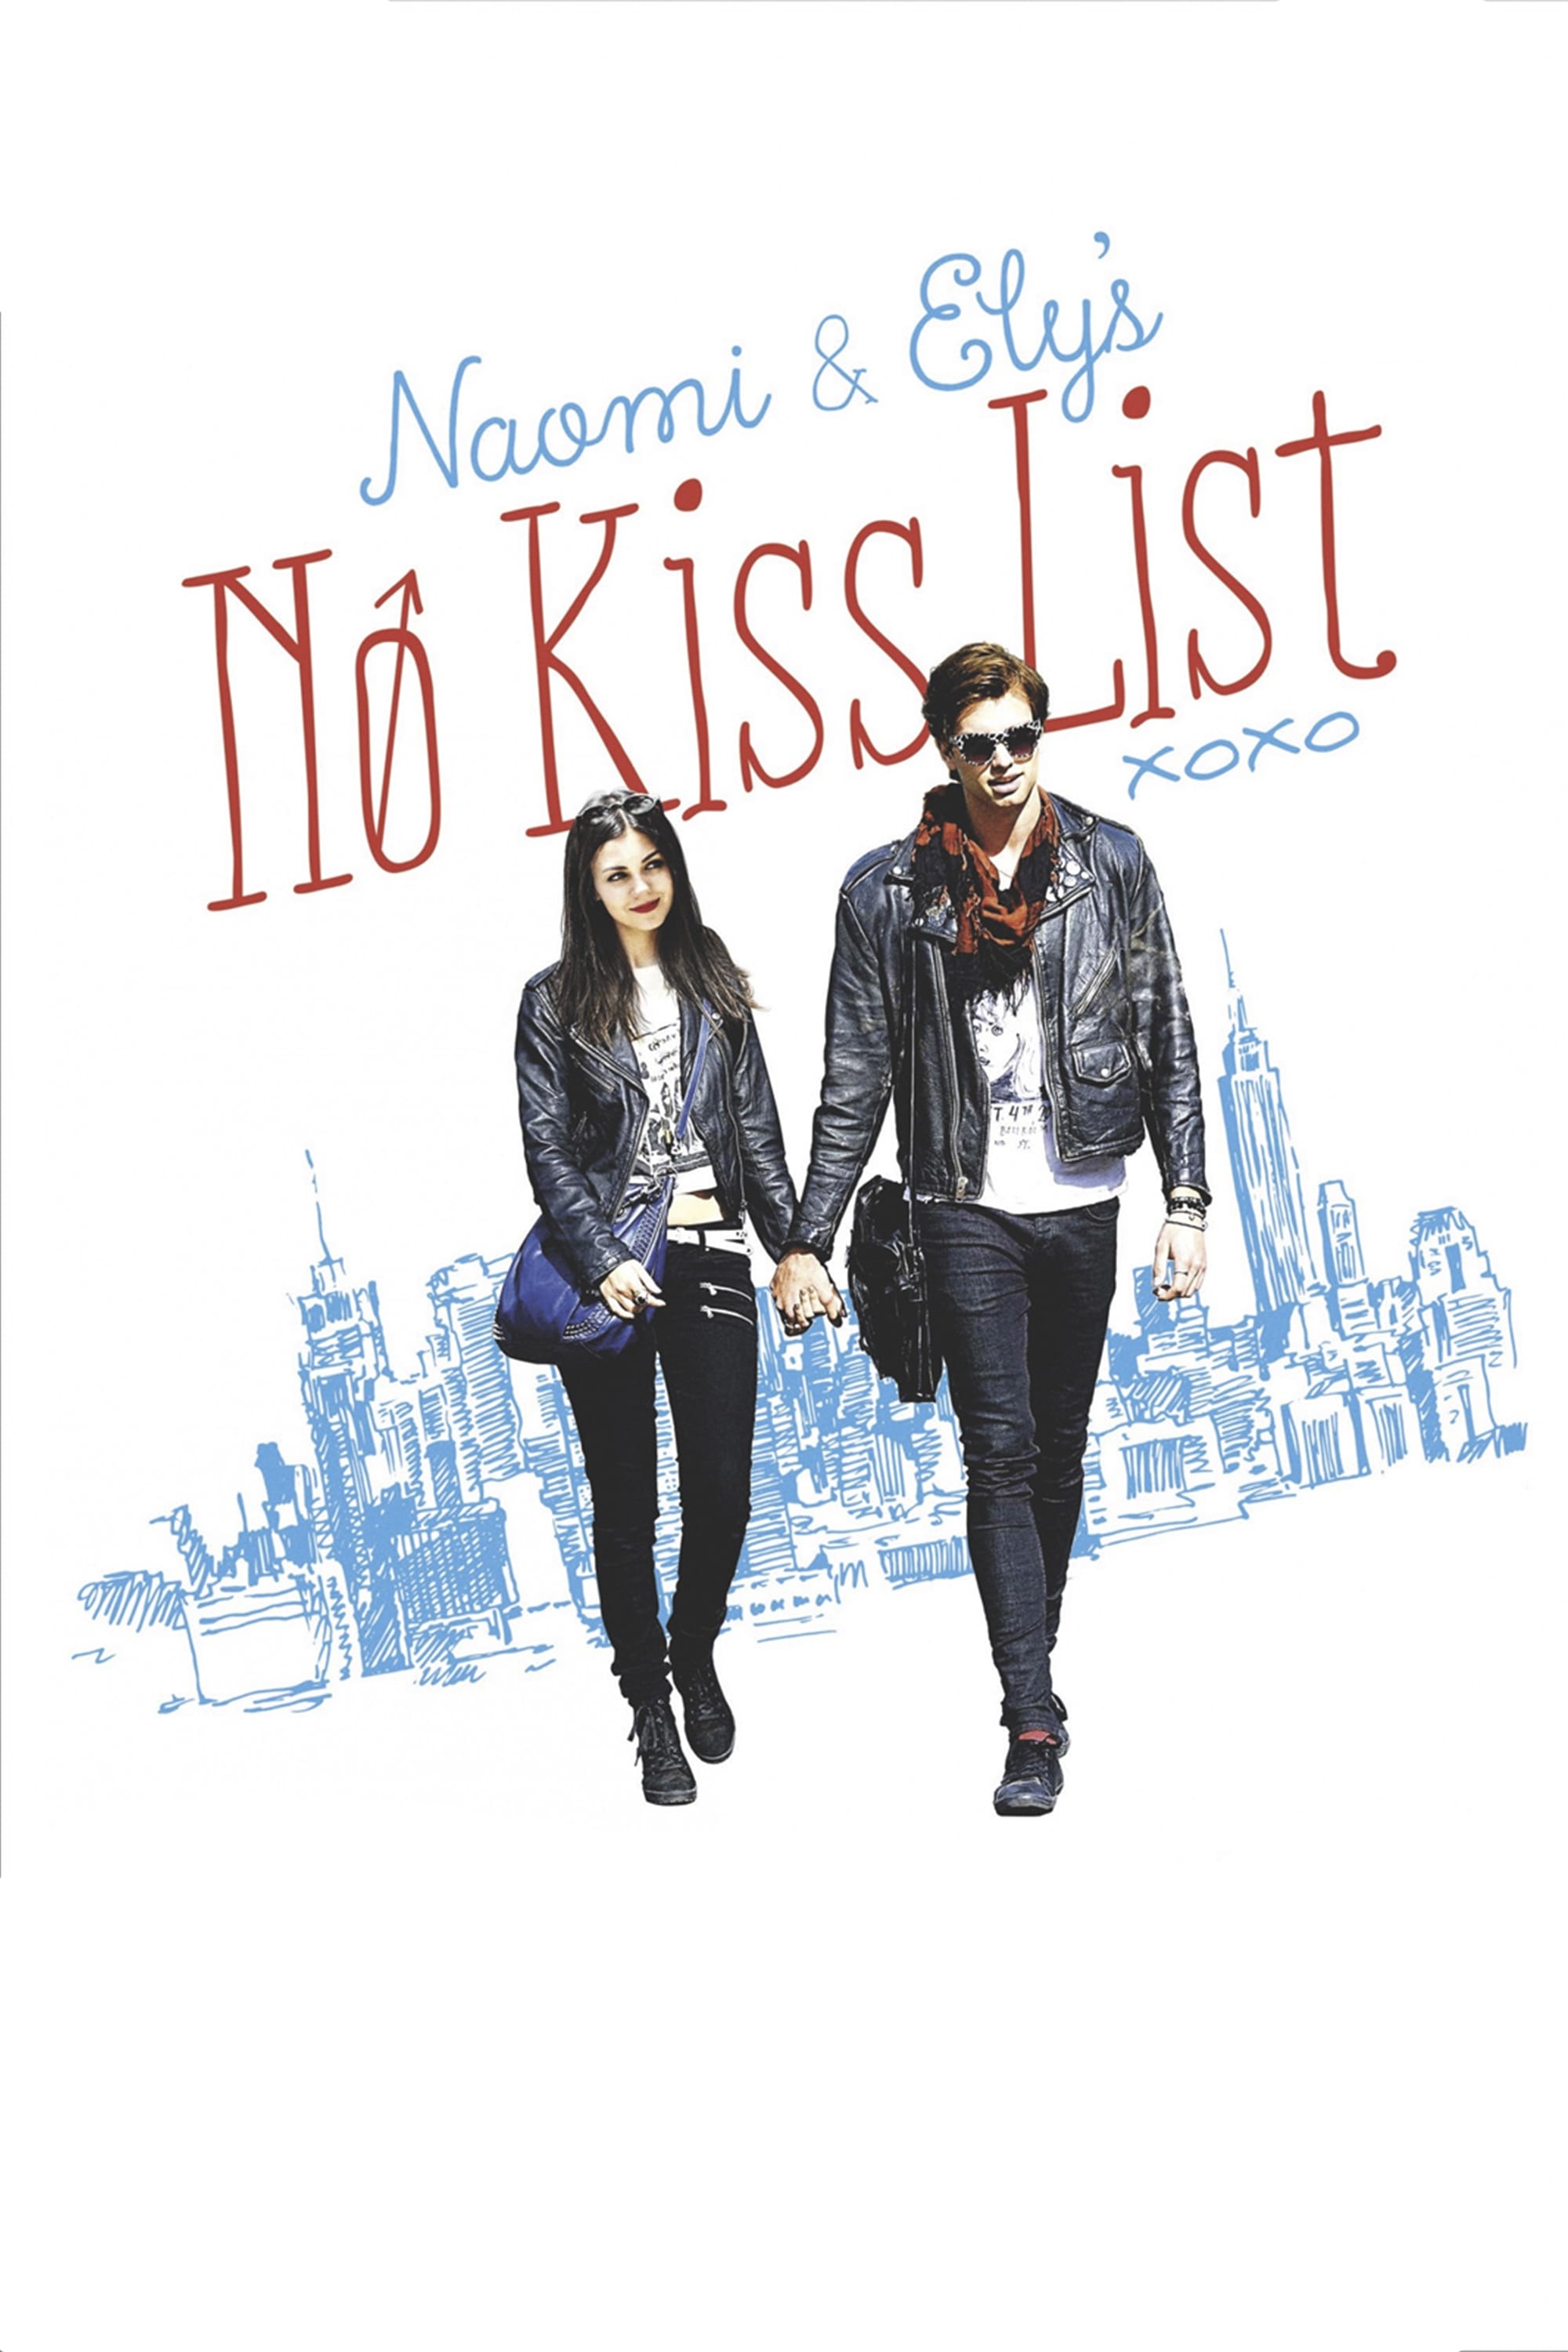 Naomi and Ely's No Kiss List (2015)